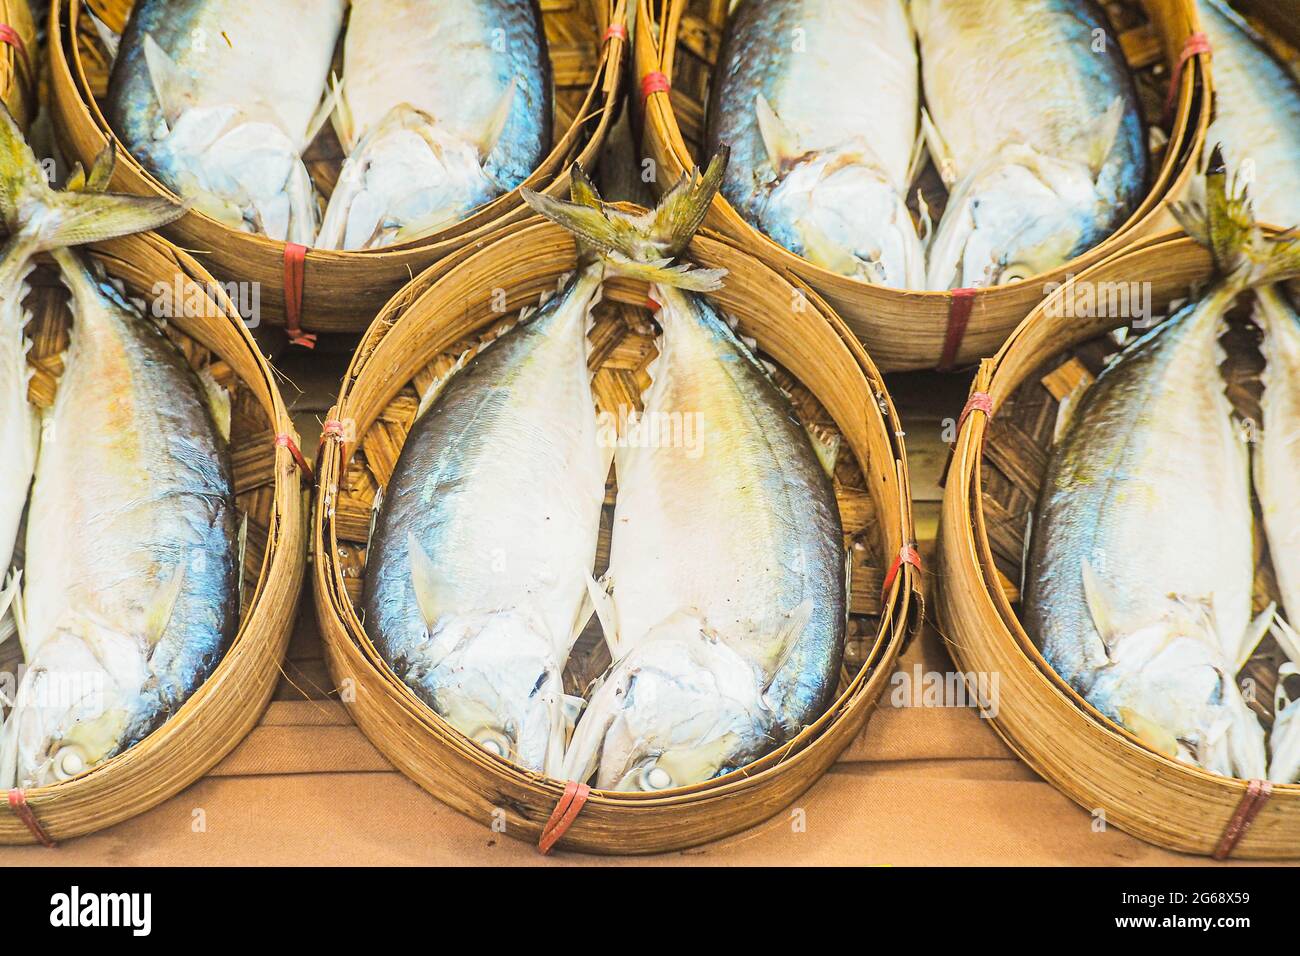 Mackerel Fishes in the Basket market business fishing industry for food. Stock Photo